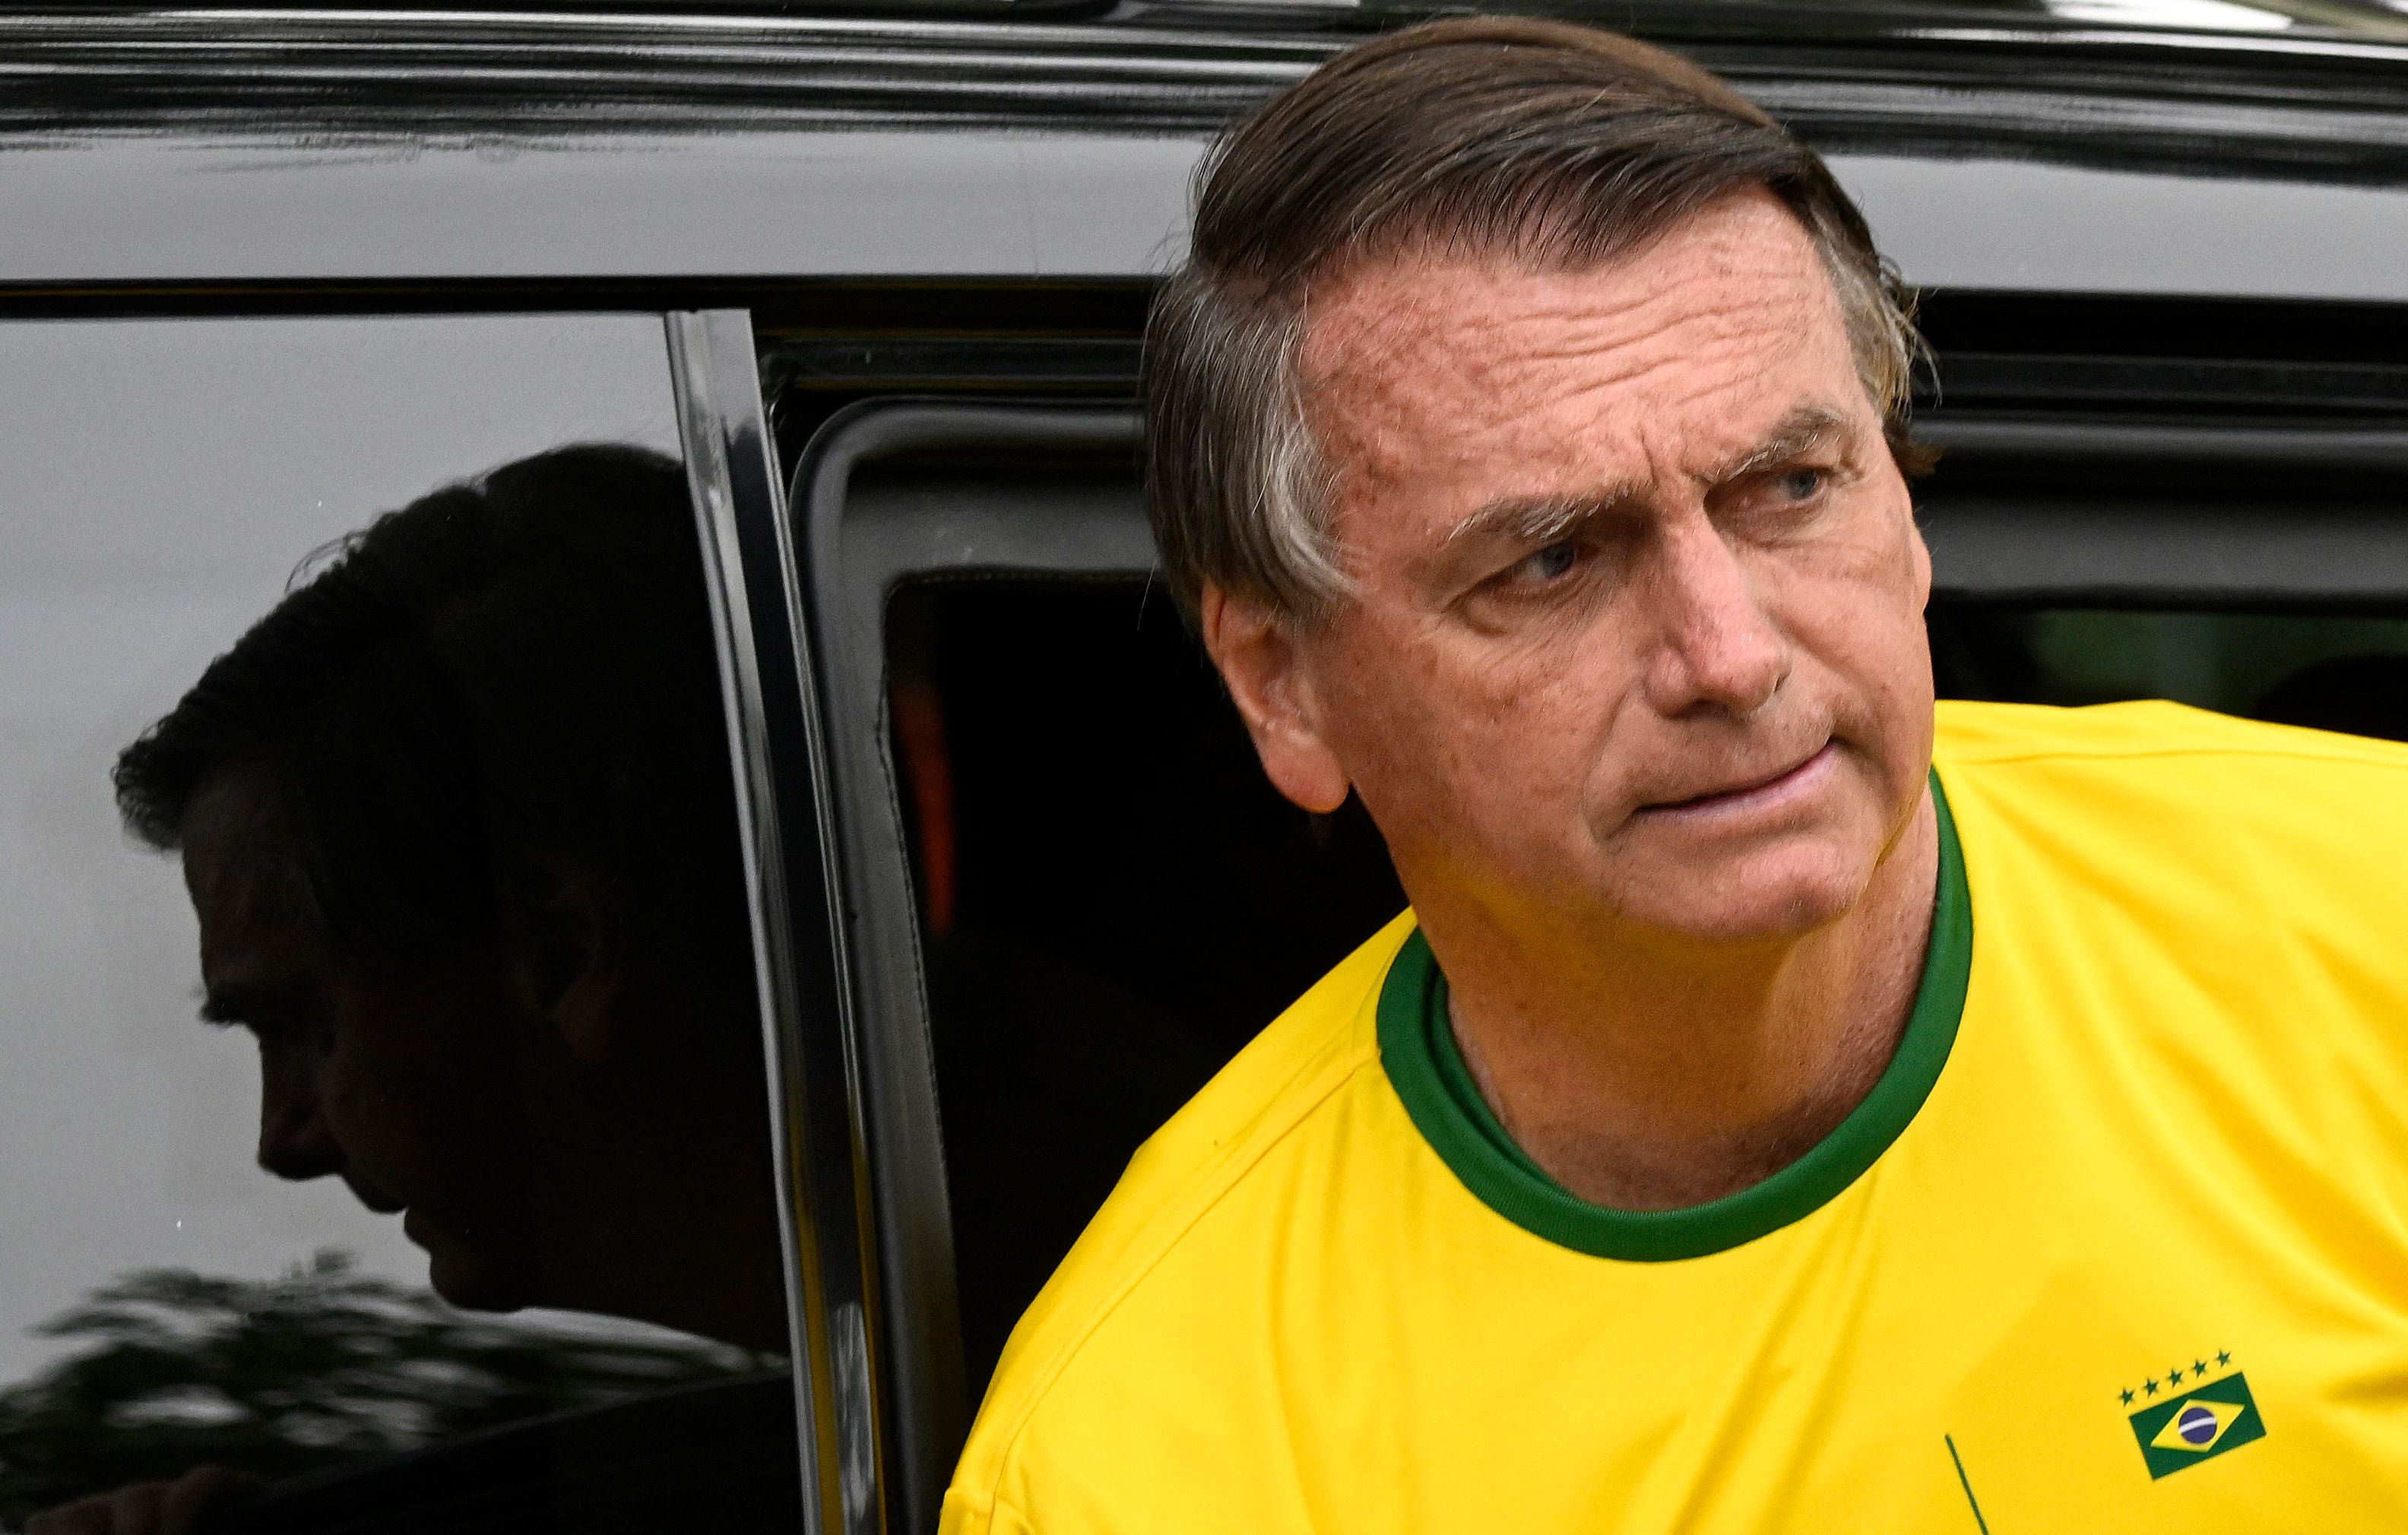 Bolsonaro arrives at a polling station during the contest that he hopes to see him re-elected